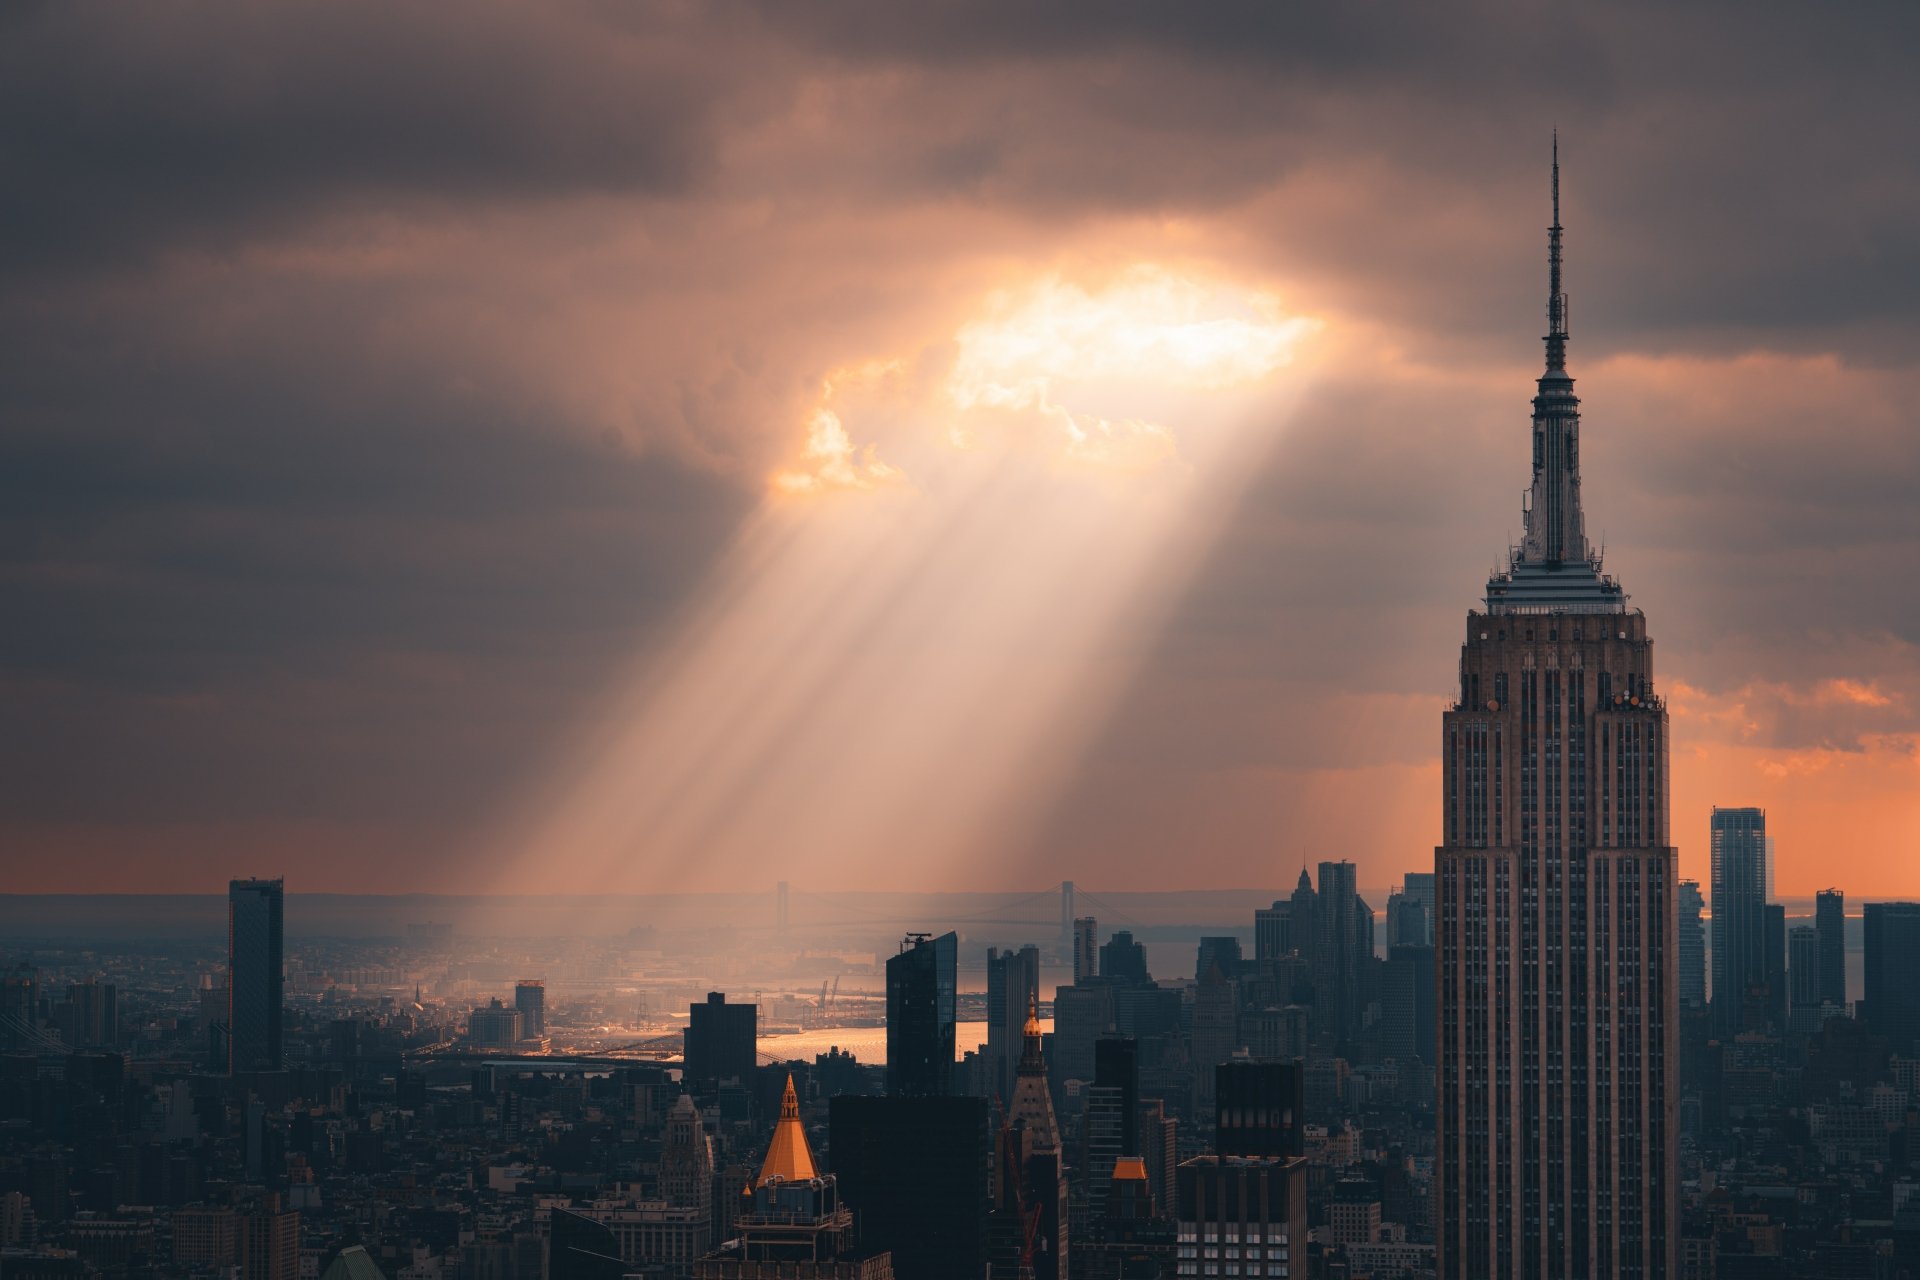 New York City Midtown With Empire State Building At Sunset Stock Photo   Download Image Now  iStock